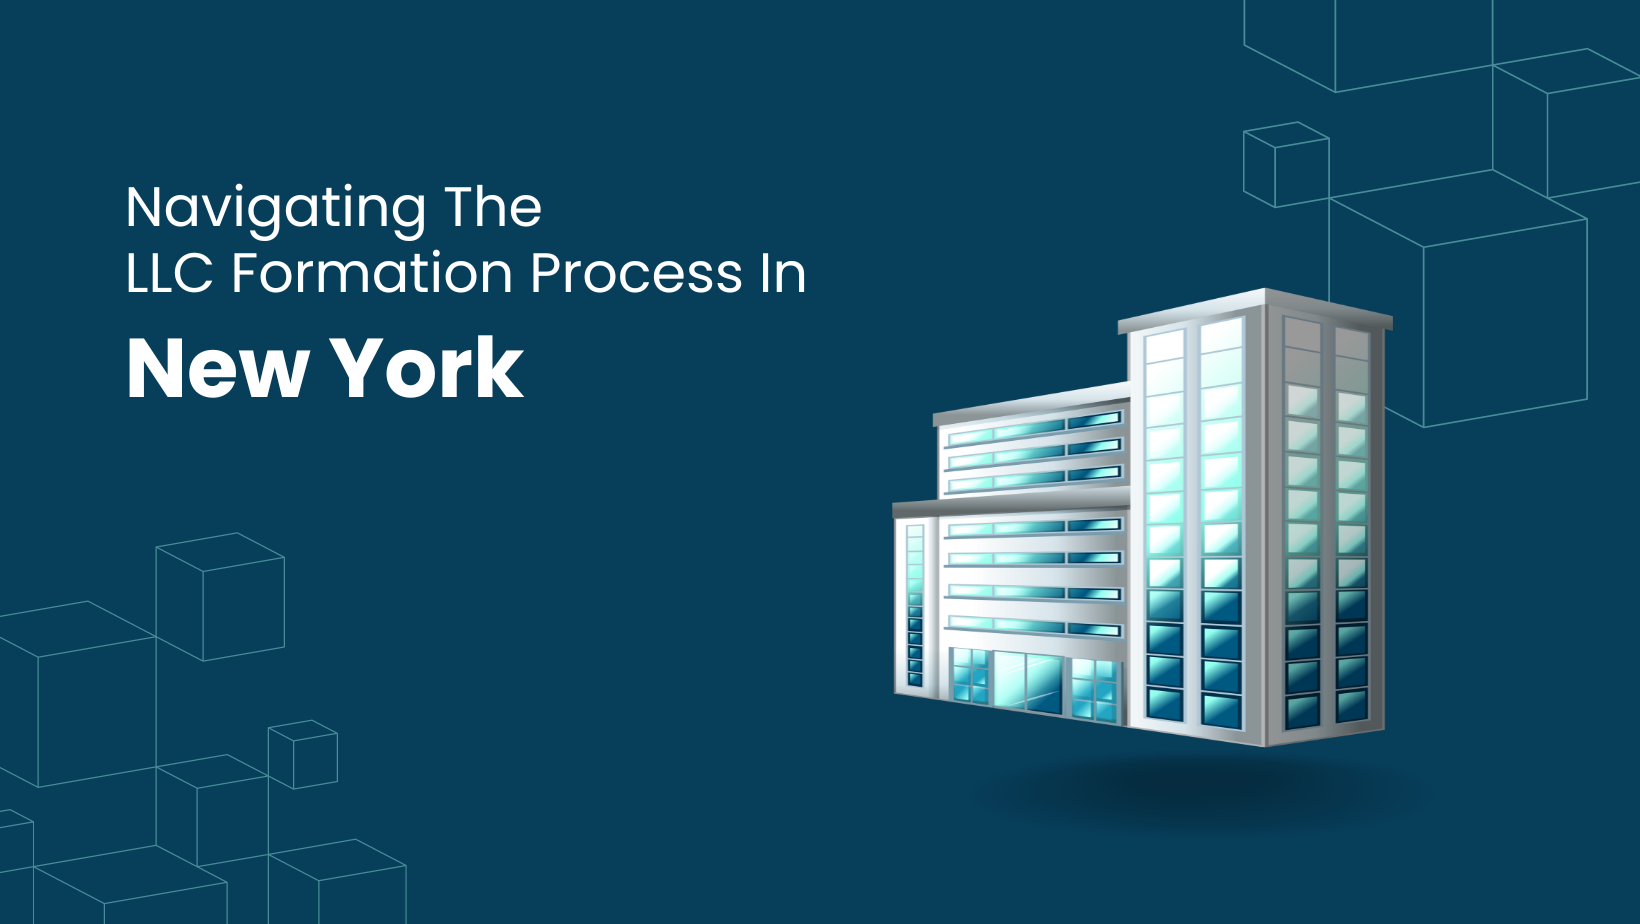 Navigating The LLC Formation Process In New York